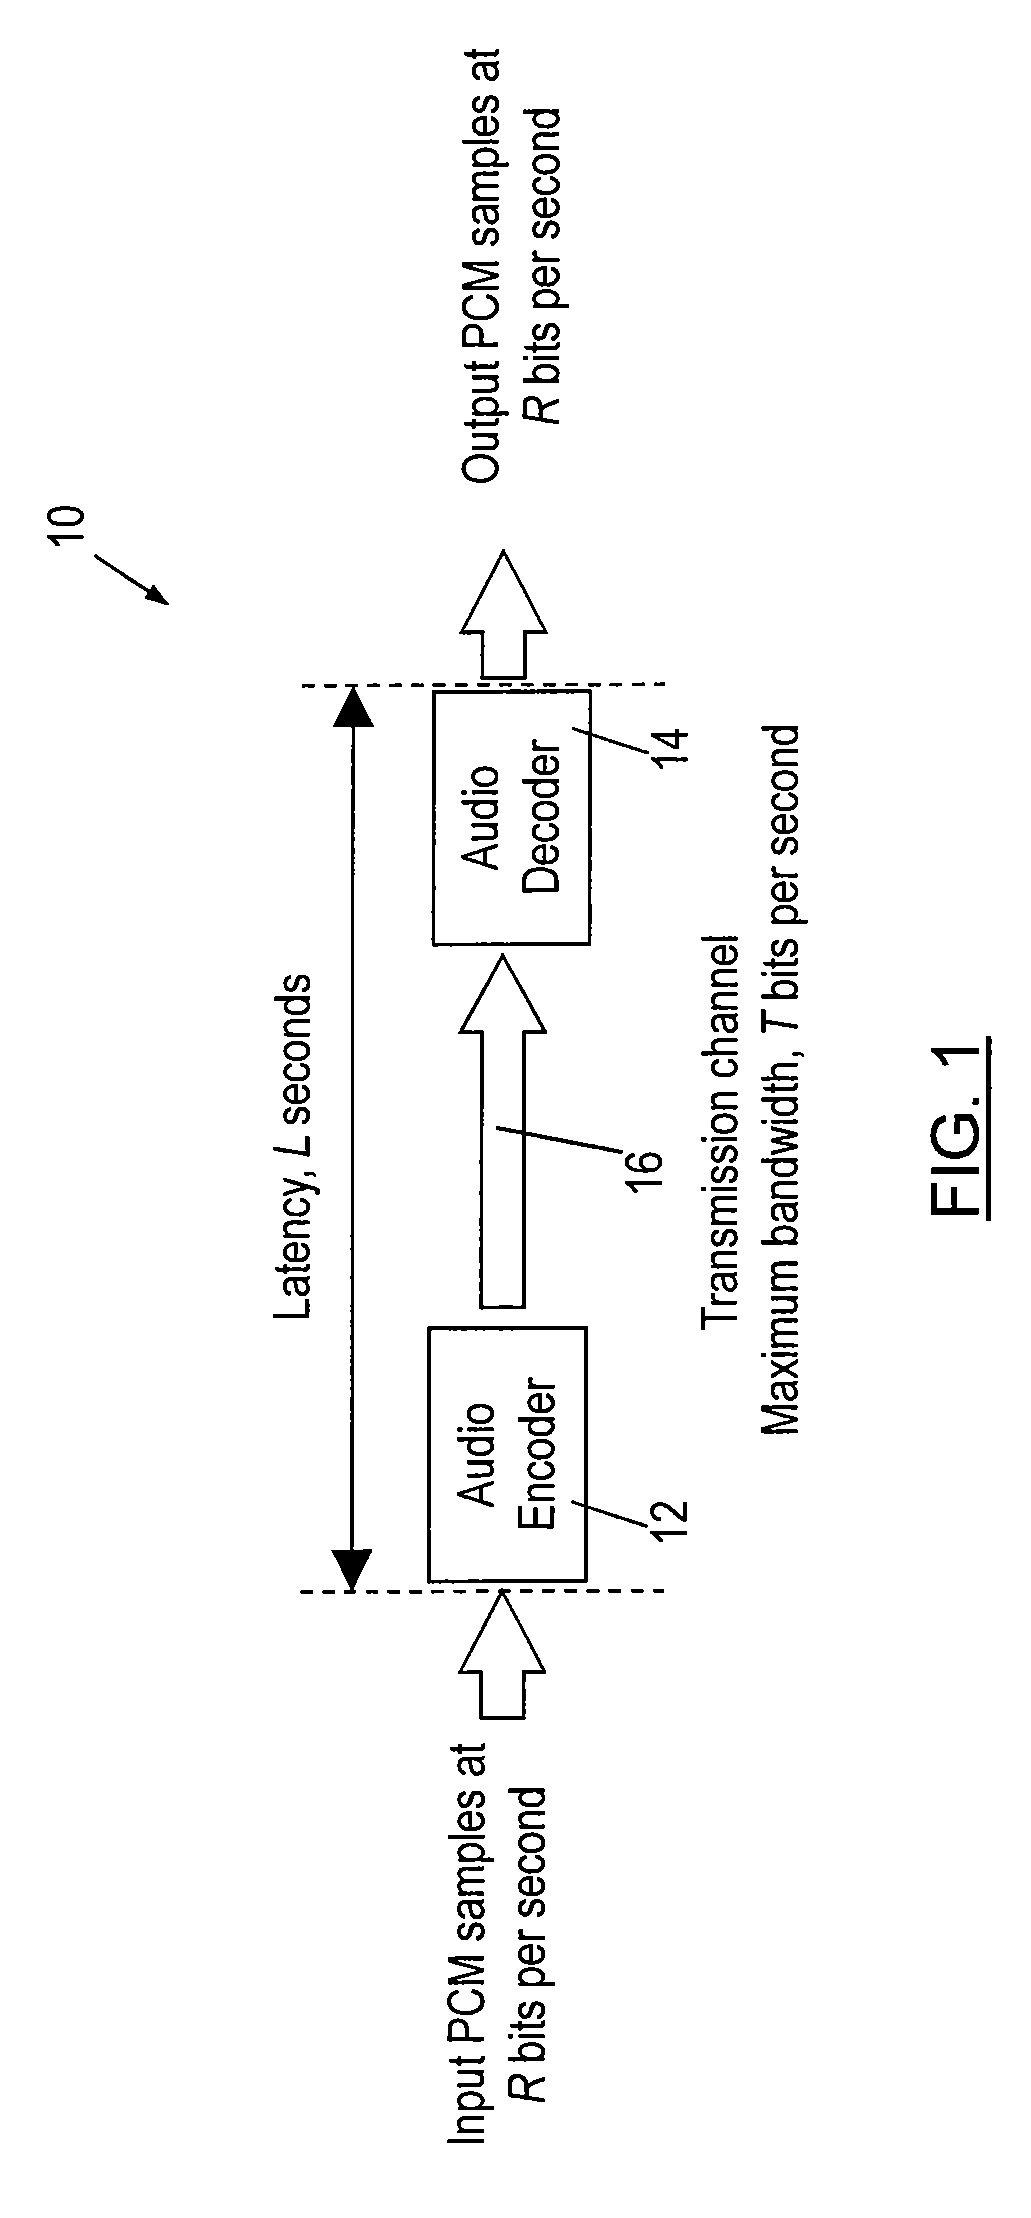 Hybrid coded audio data streaming apparatus and method